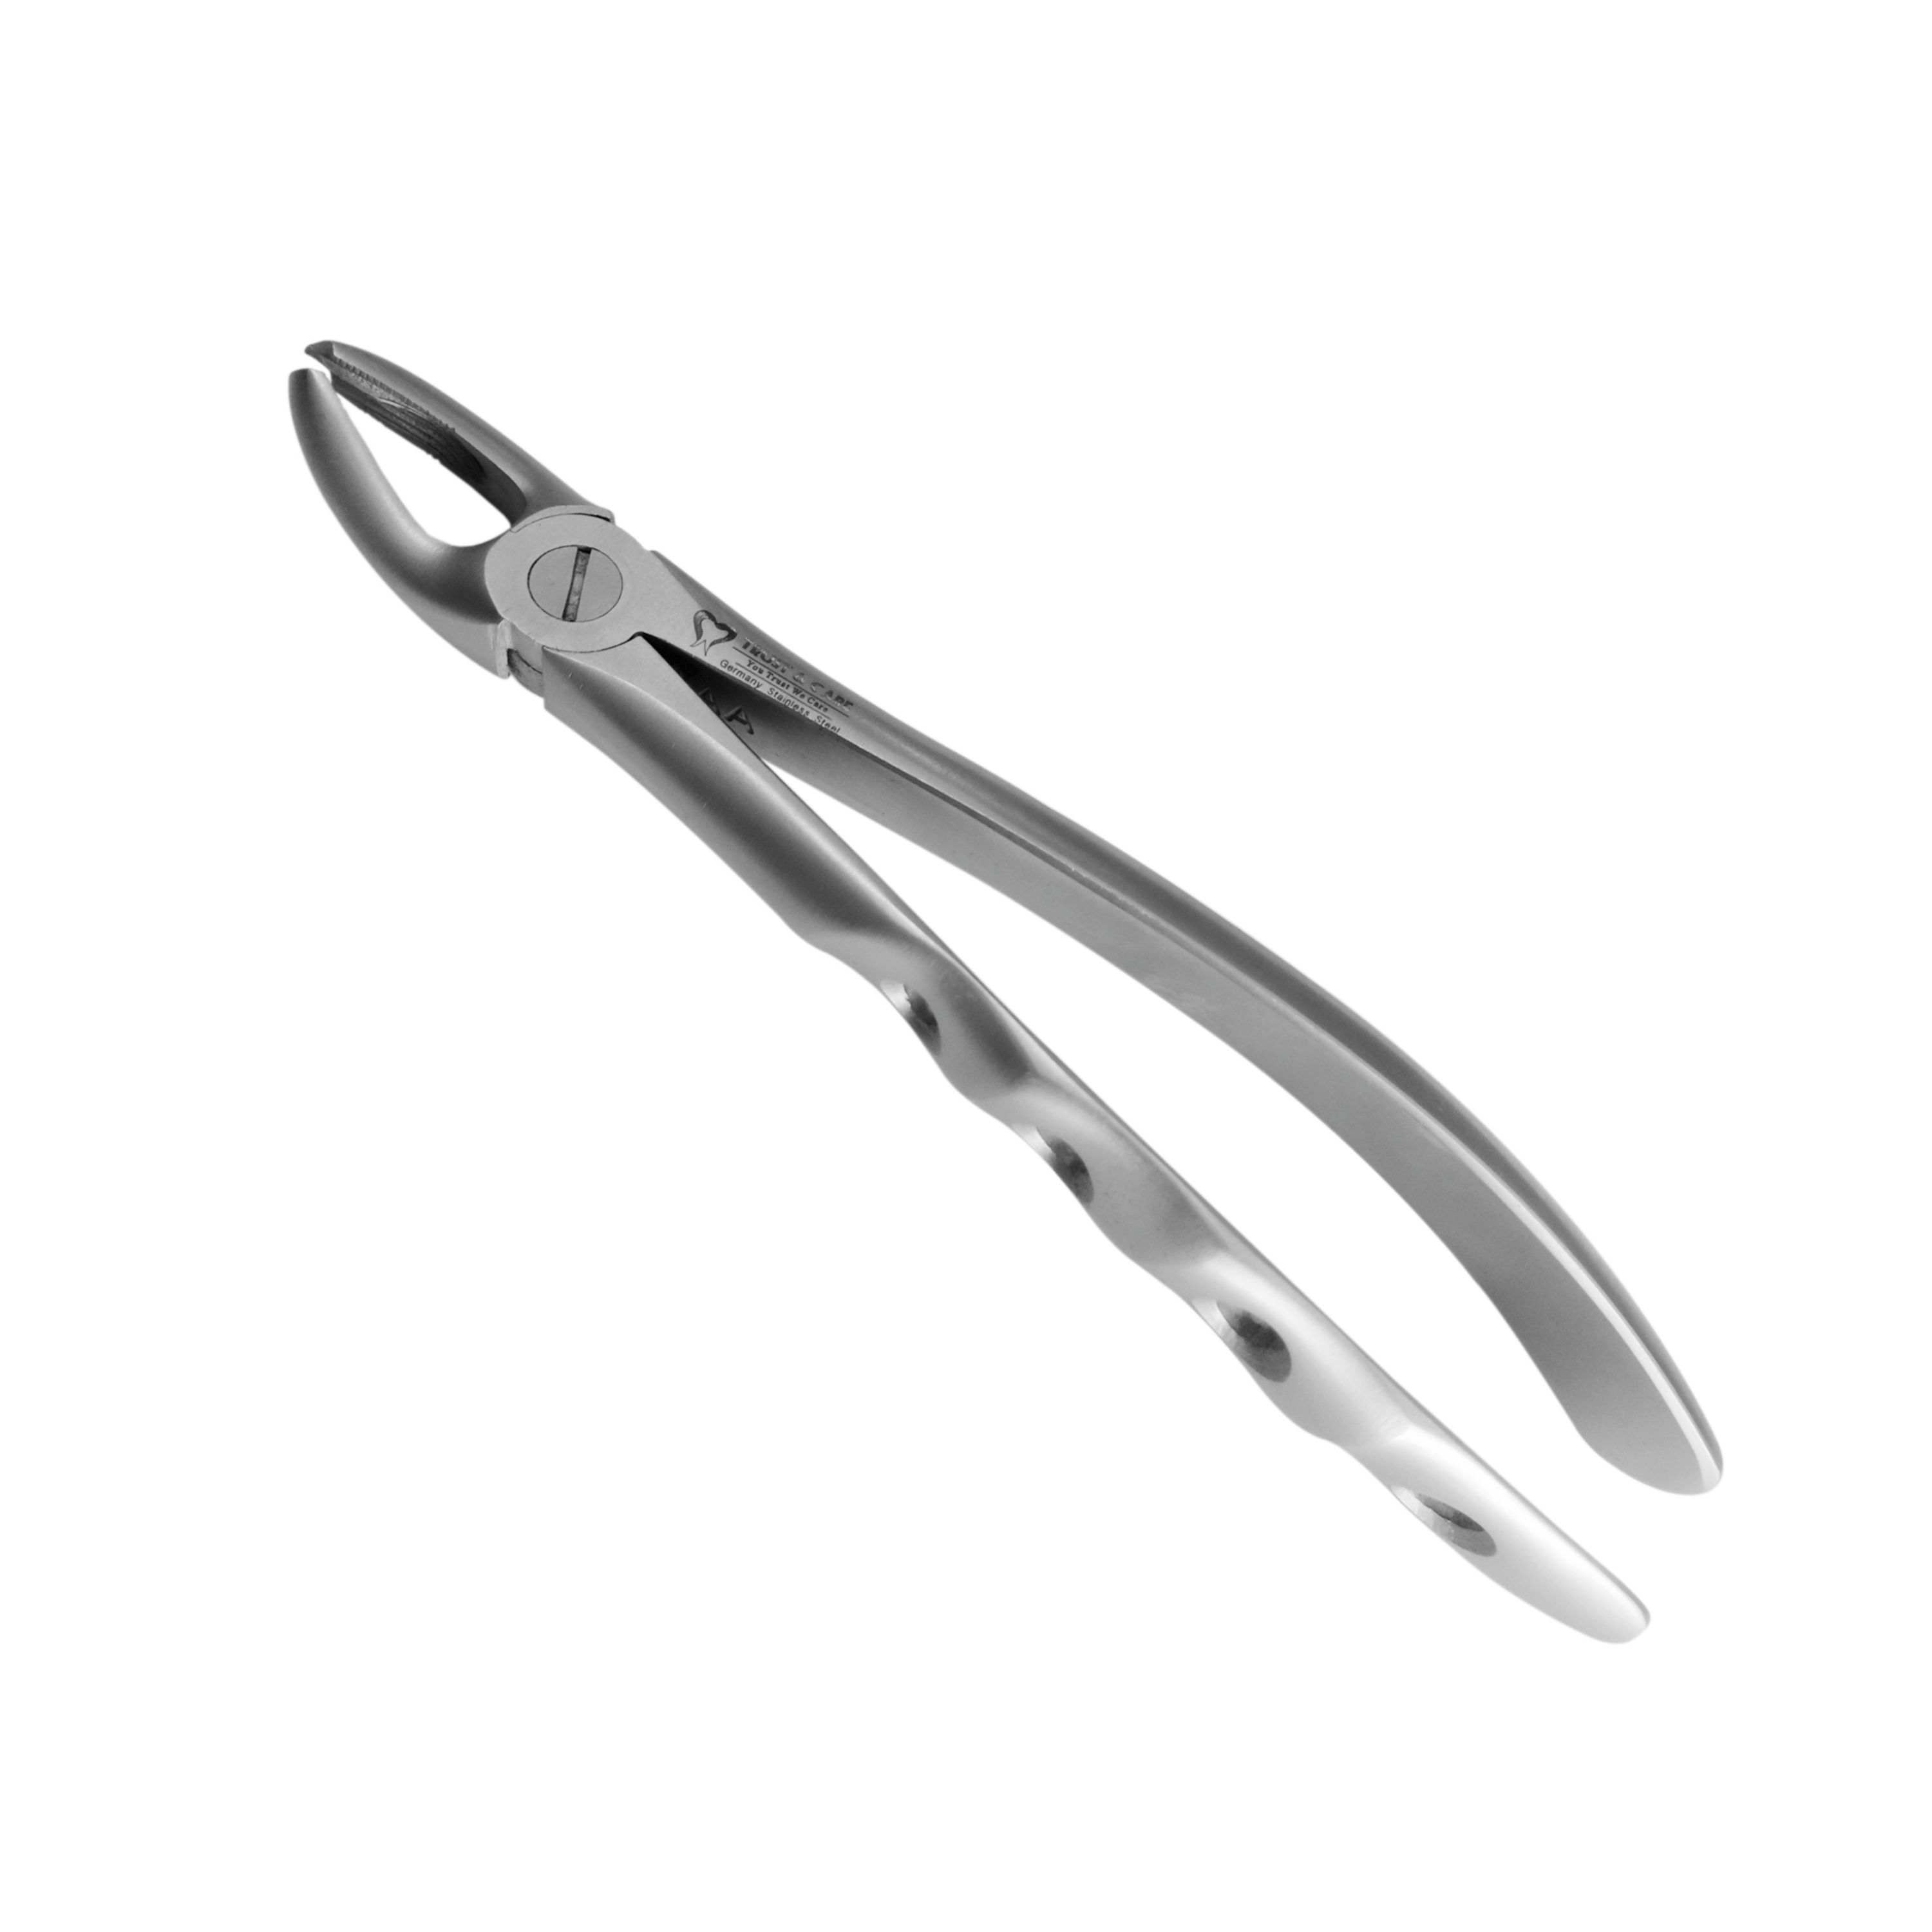 Trust & Care Tooth Extraction Forcep Upper Molars Left Fig No. 18 Premium